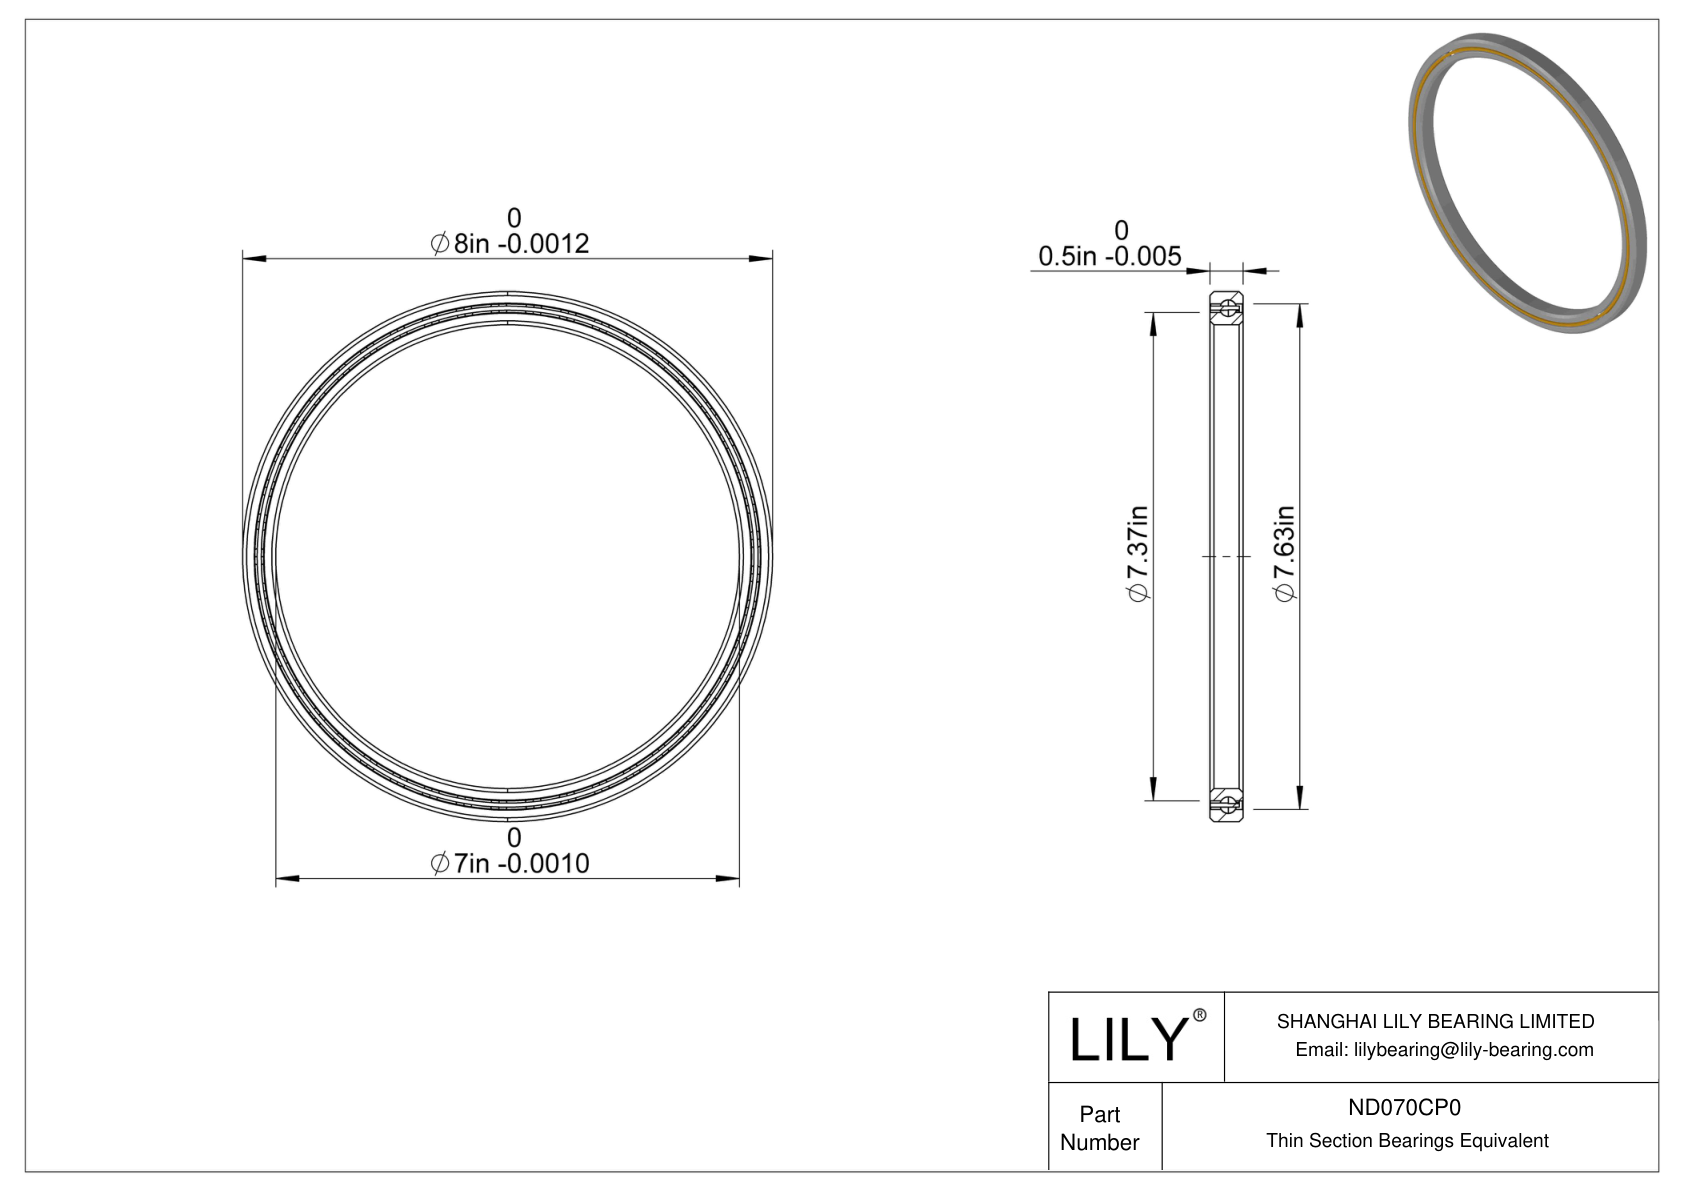 ND070CP0 Constant Section (CS) Bearings cad drawing